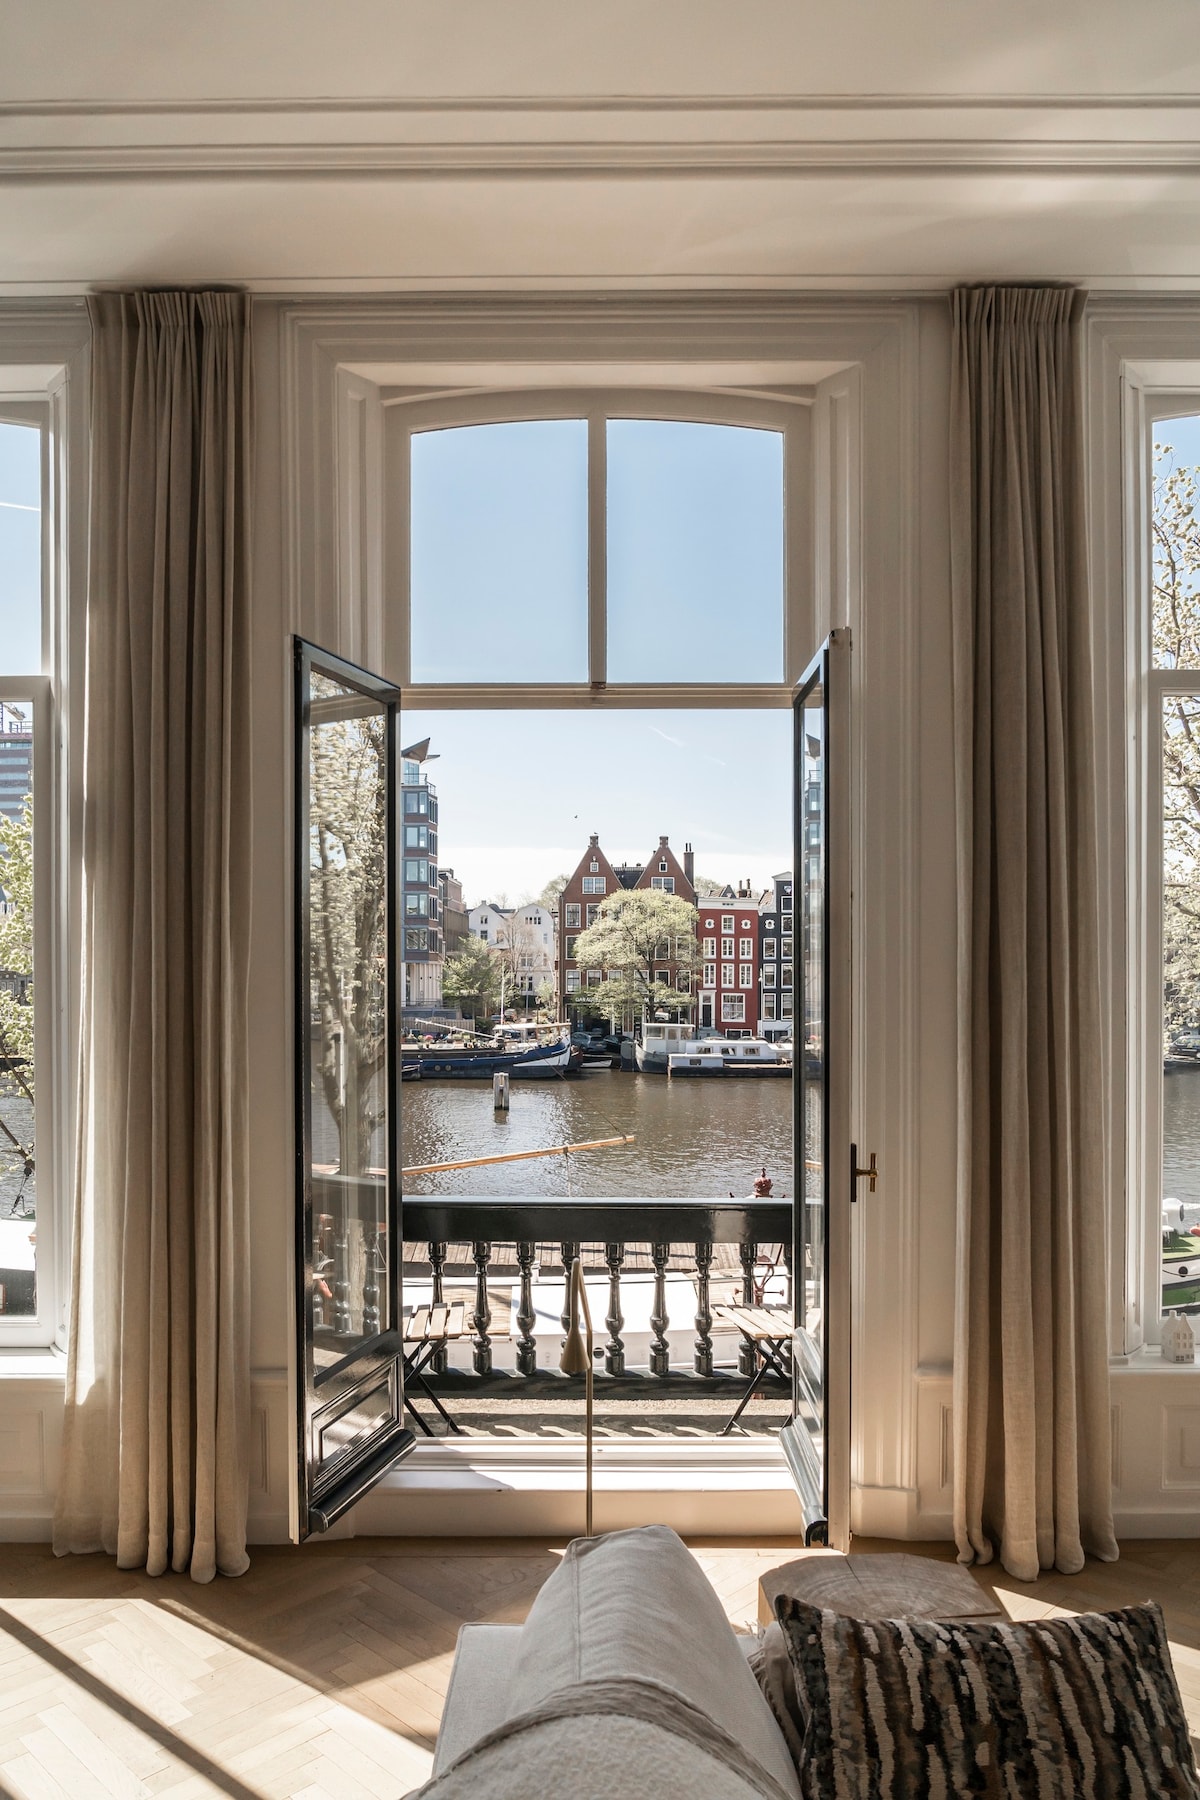 Luxury canal house Amsterdam